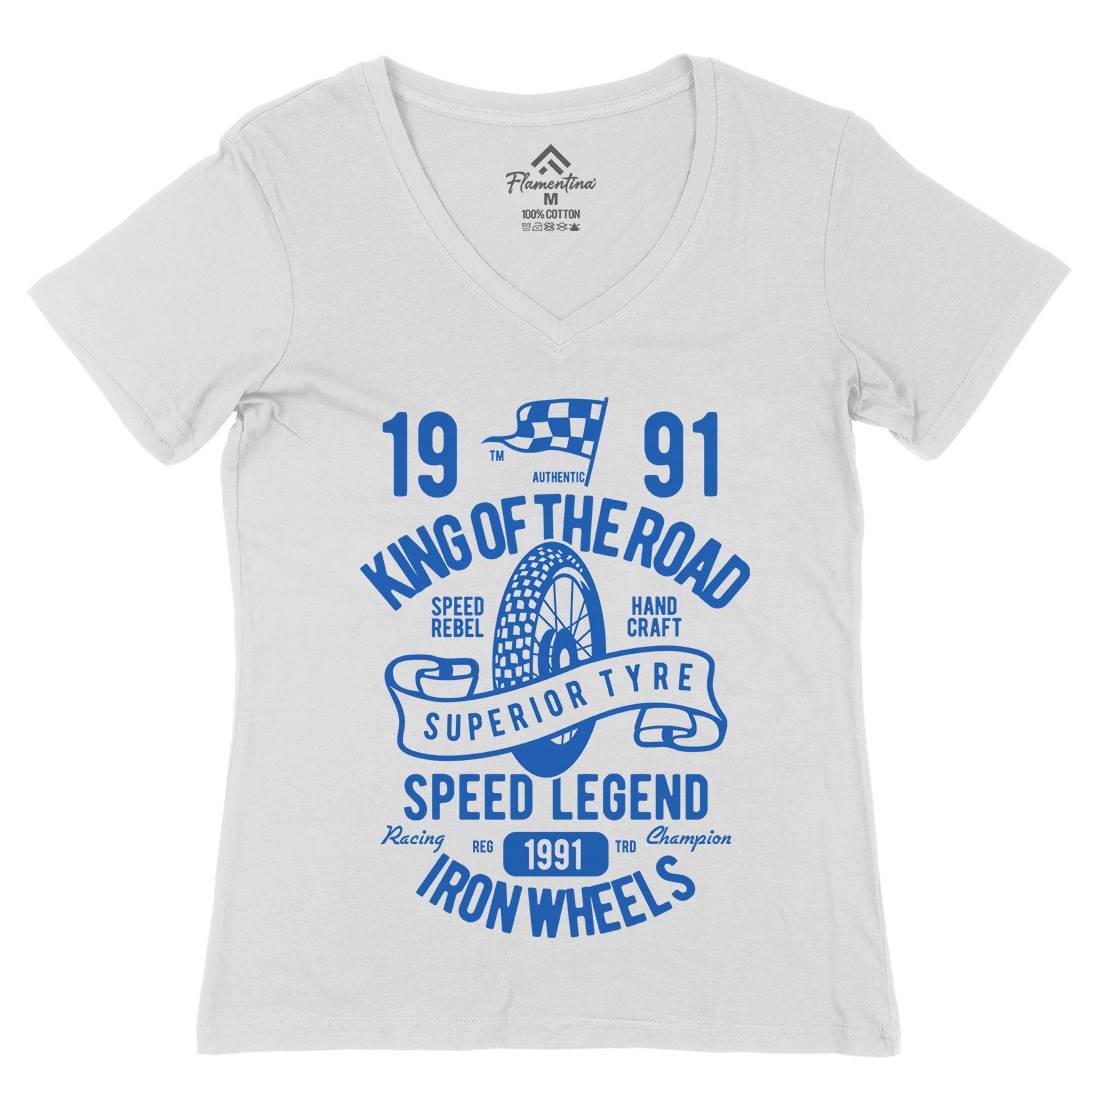 Superior Tyre King Of The Road Womens Organic V-Neck T-Shirt Motorcycles B458